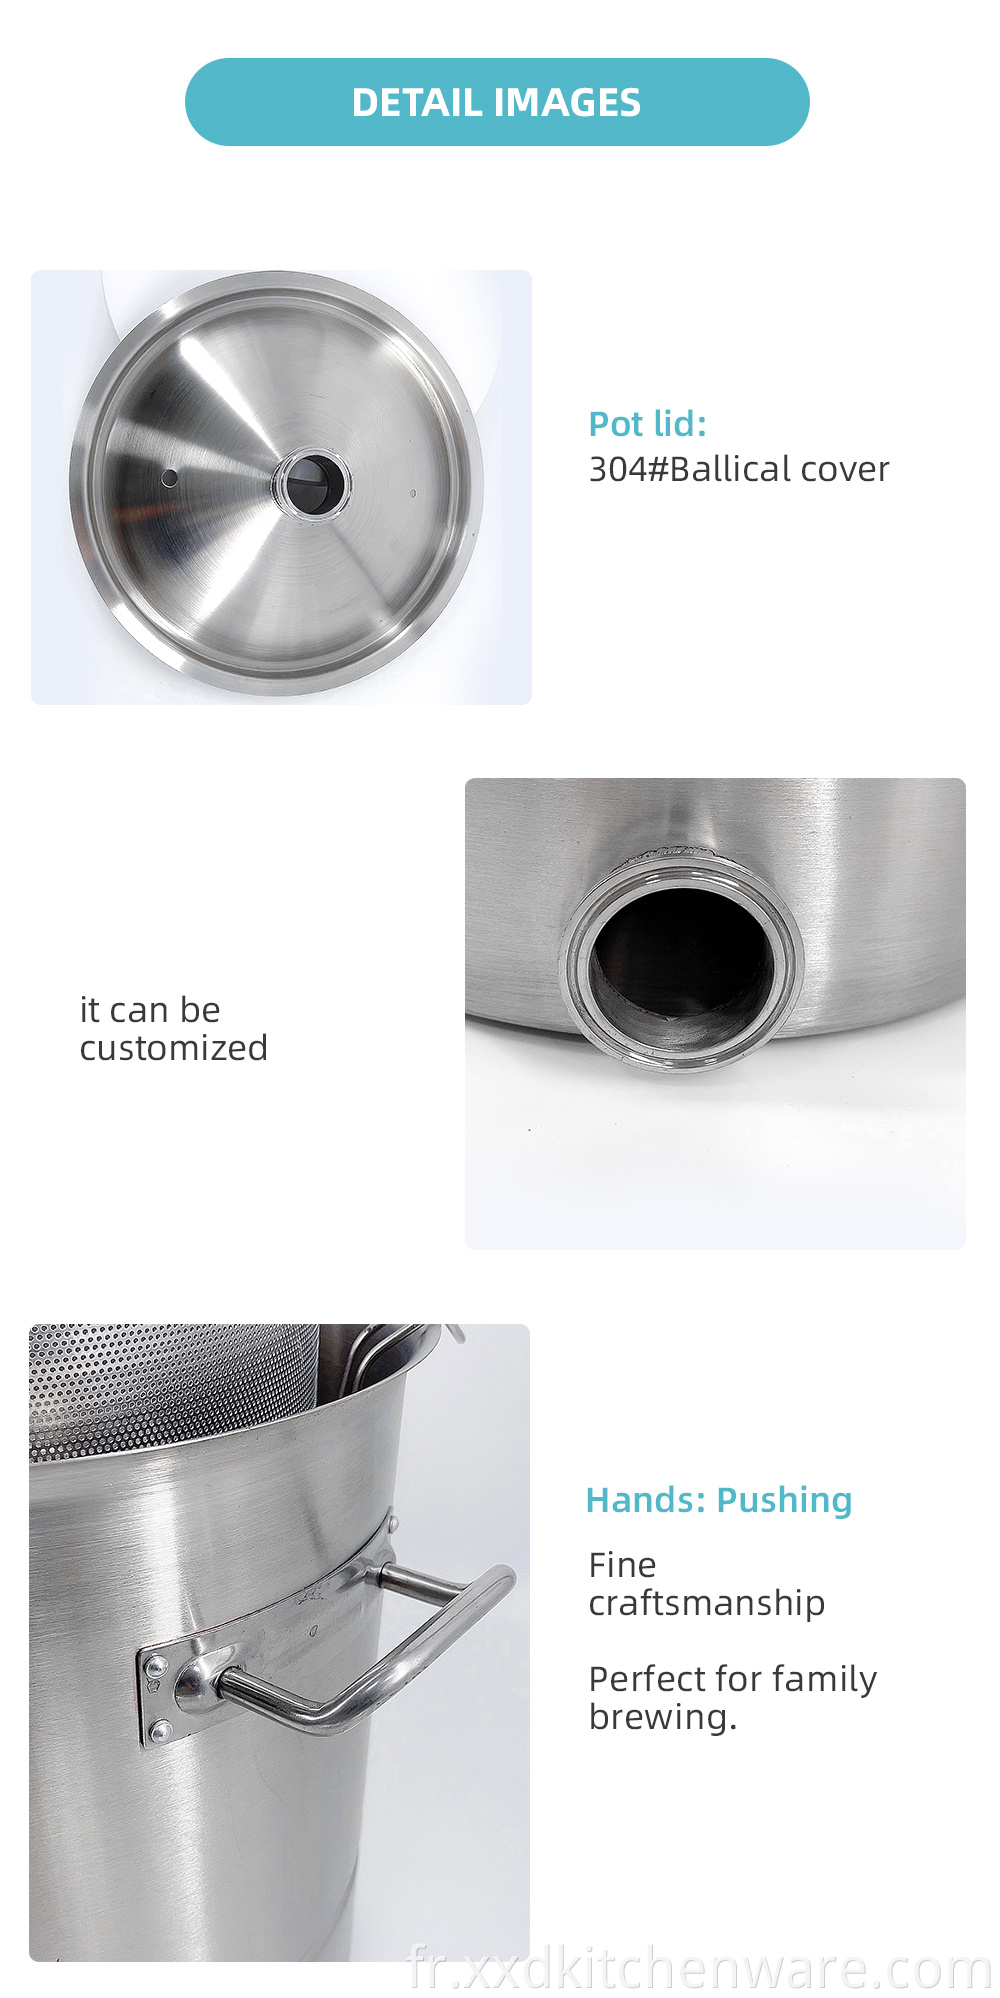 High Quality Stainless Steel Beer Barrel